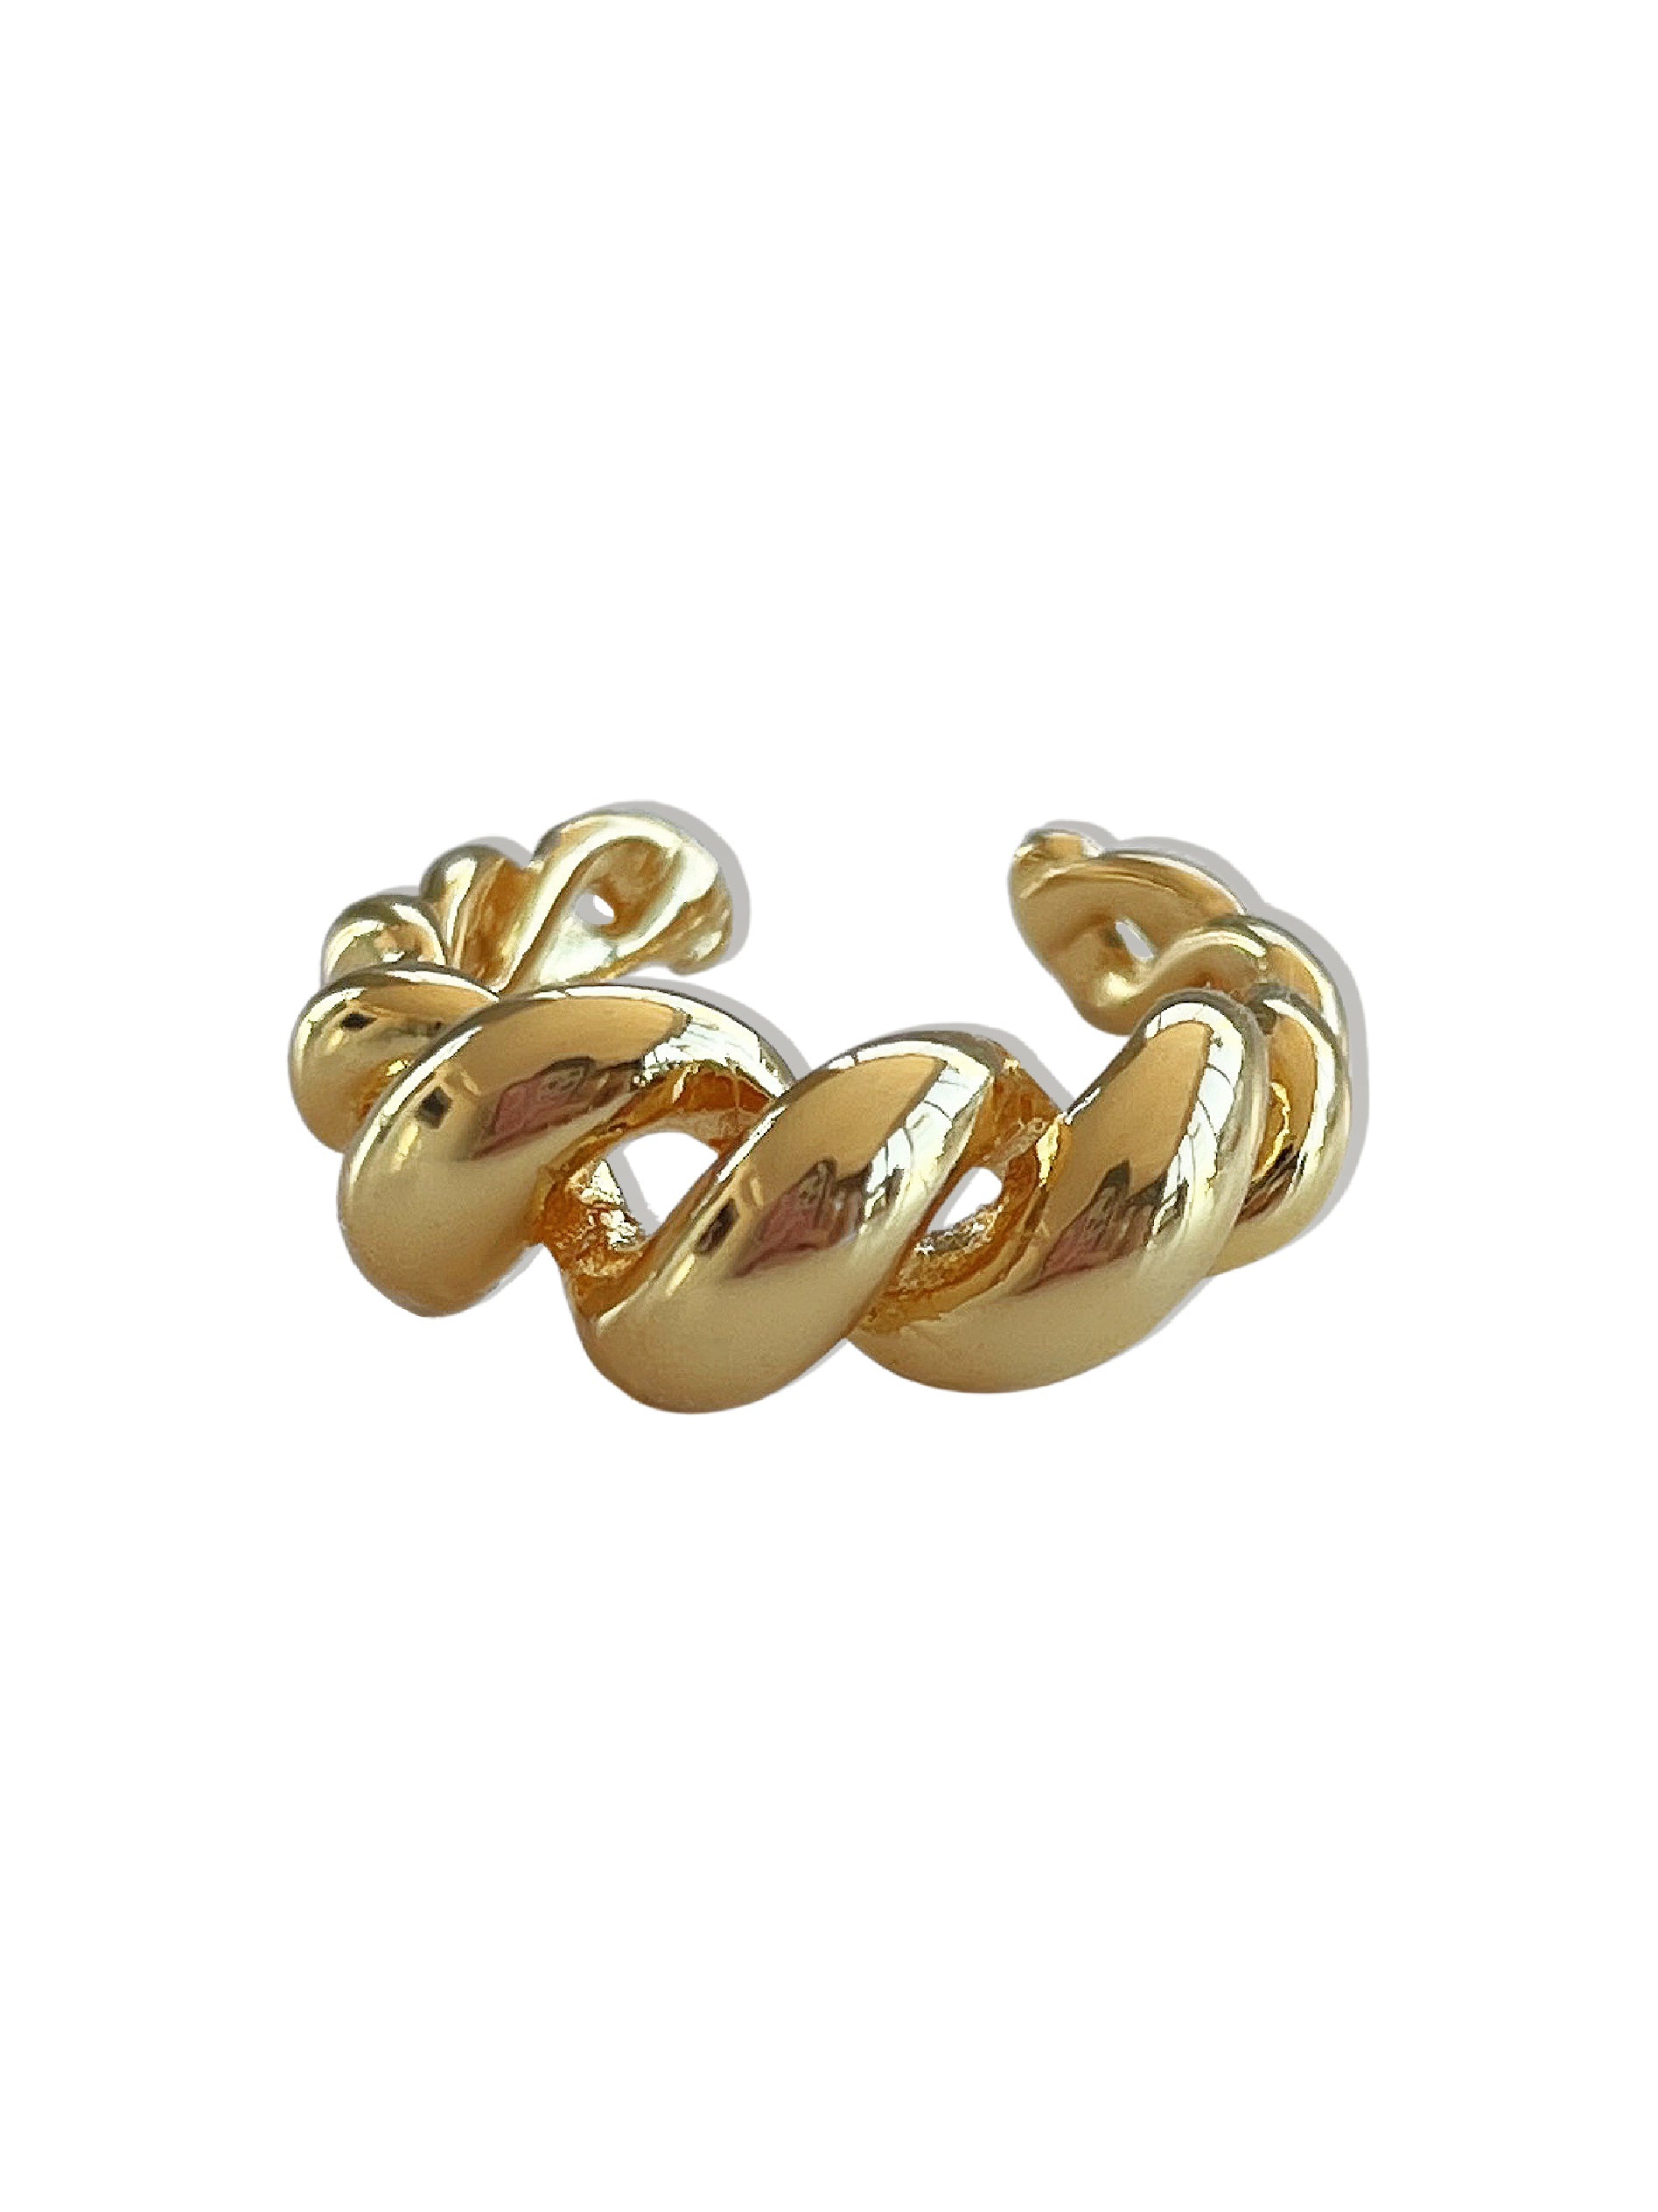 EVERYDAY GOLD CROISSANT RING